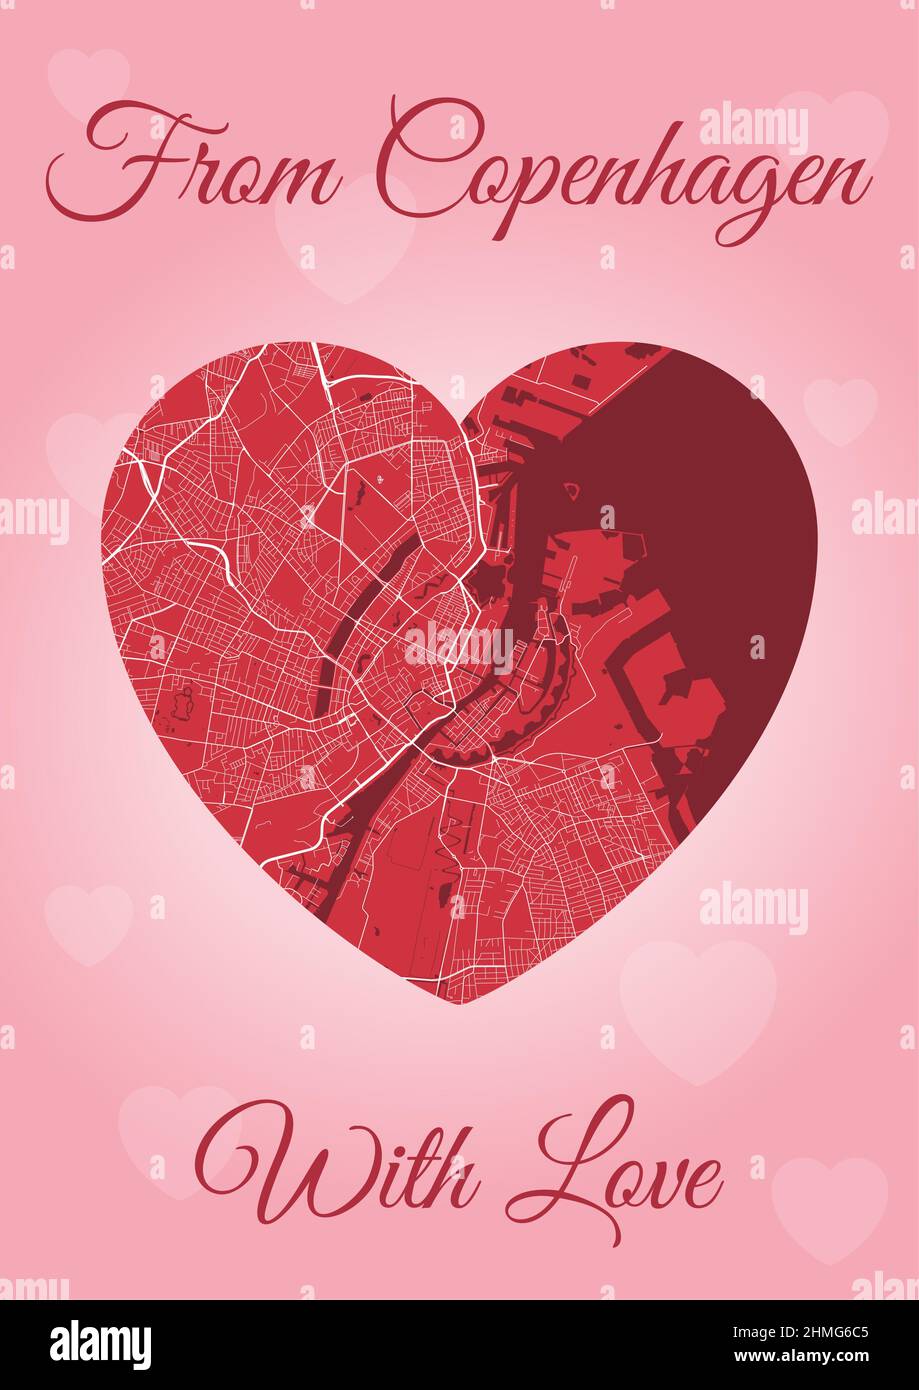 From Copenhagen with love card, city map in heart shape. Vertical A4 Pink and red color vector illustration. Love city travel cityscape. Stock Vector